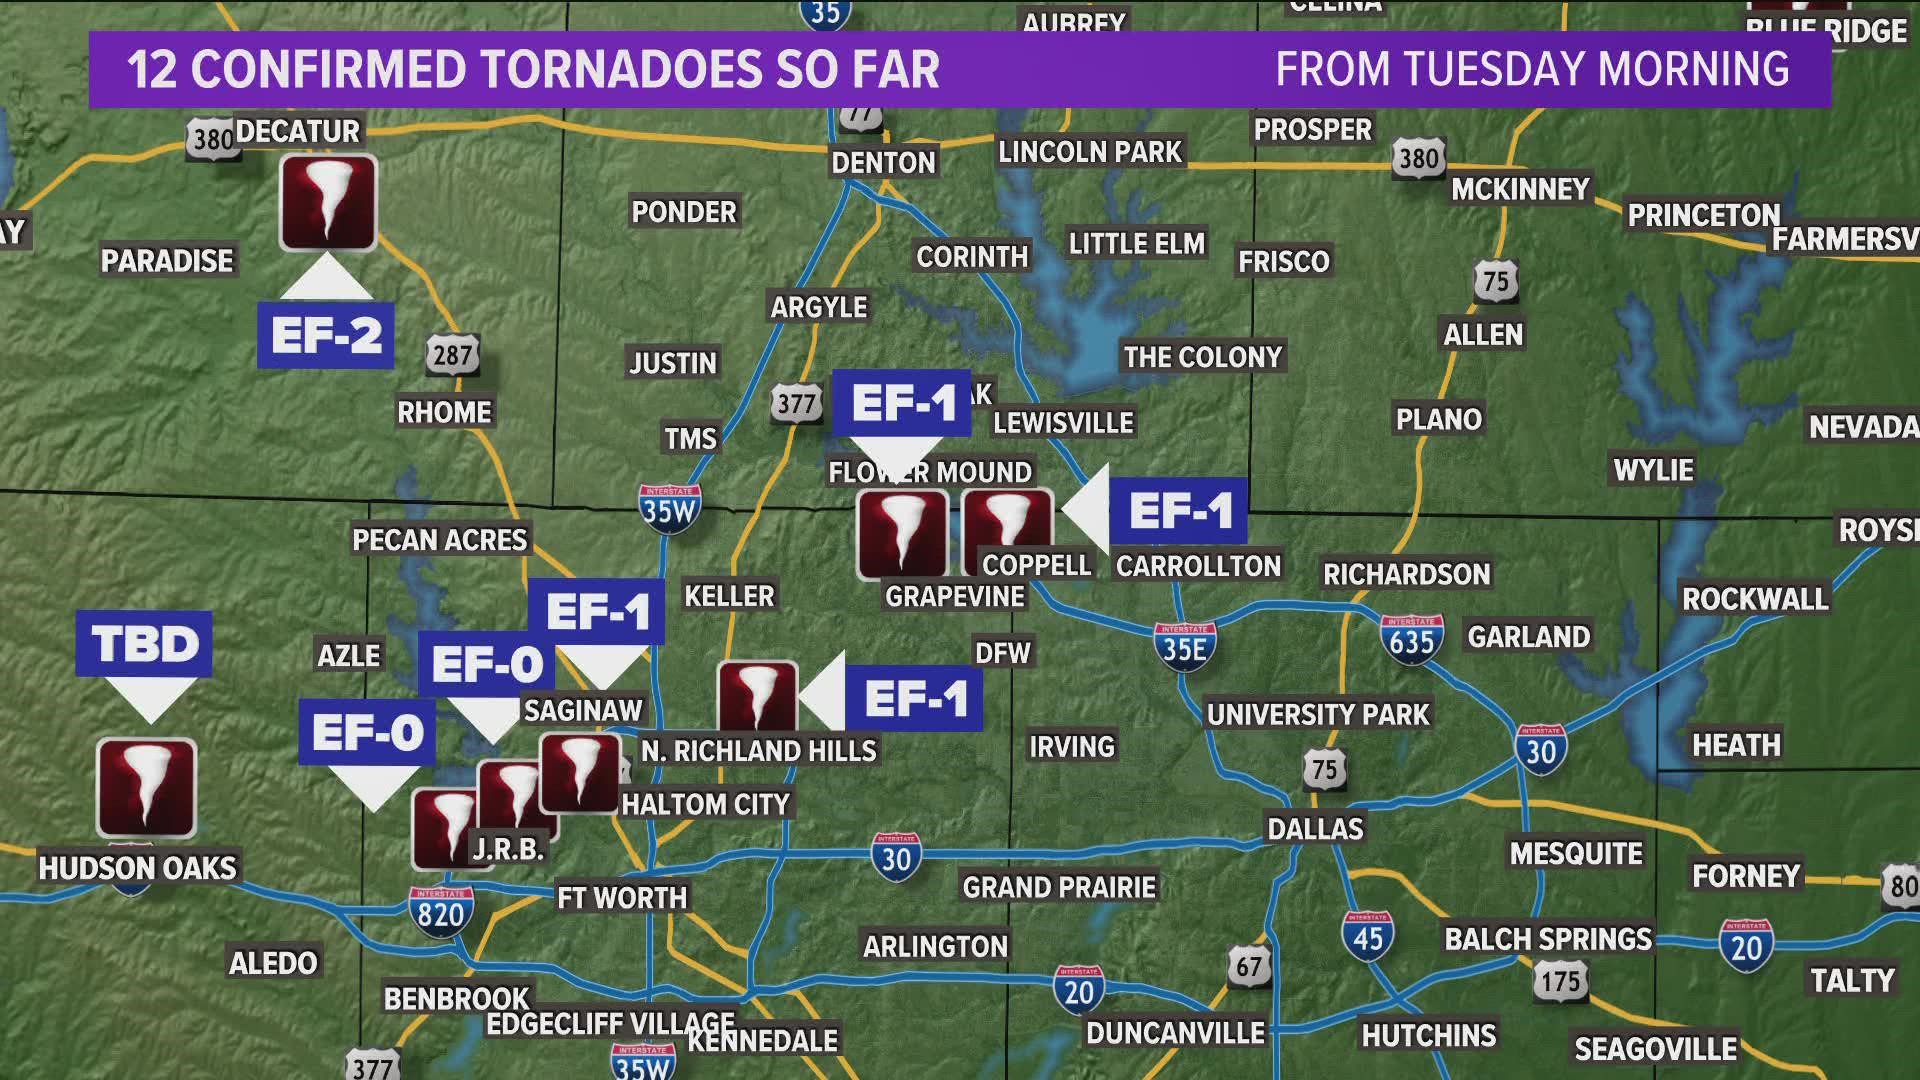 The National Weather Service continues to survey areas where tornadoes potentially touched down.